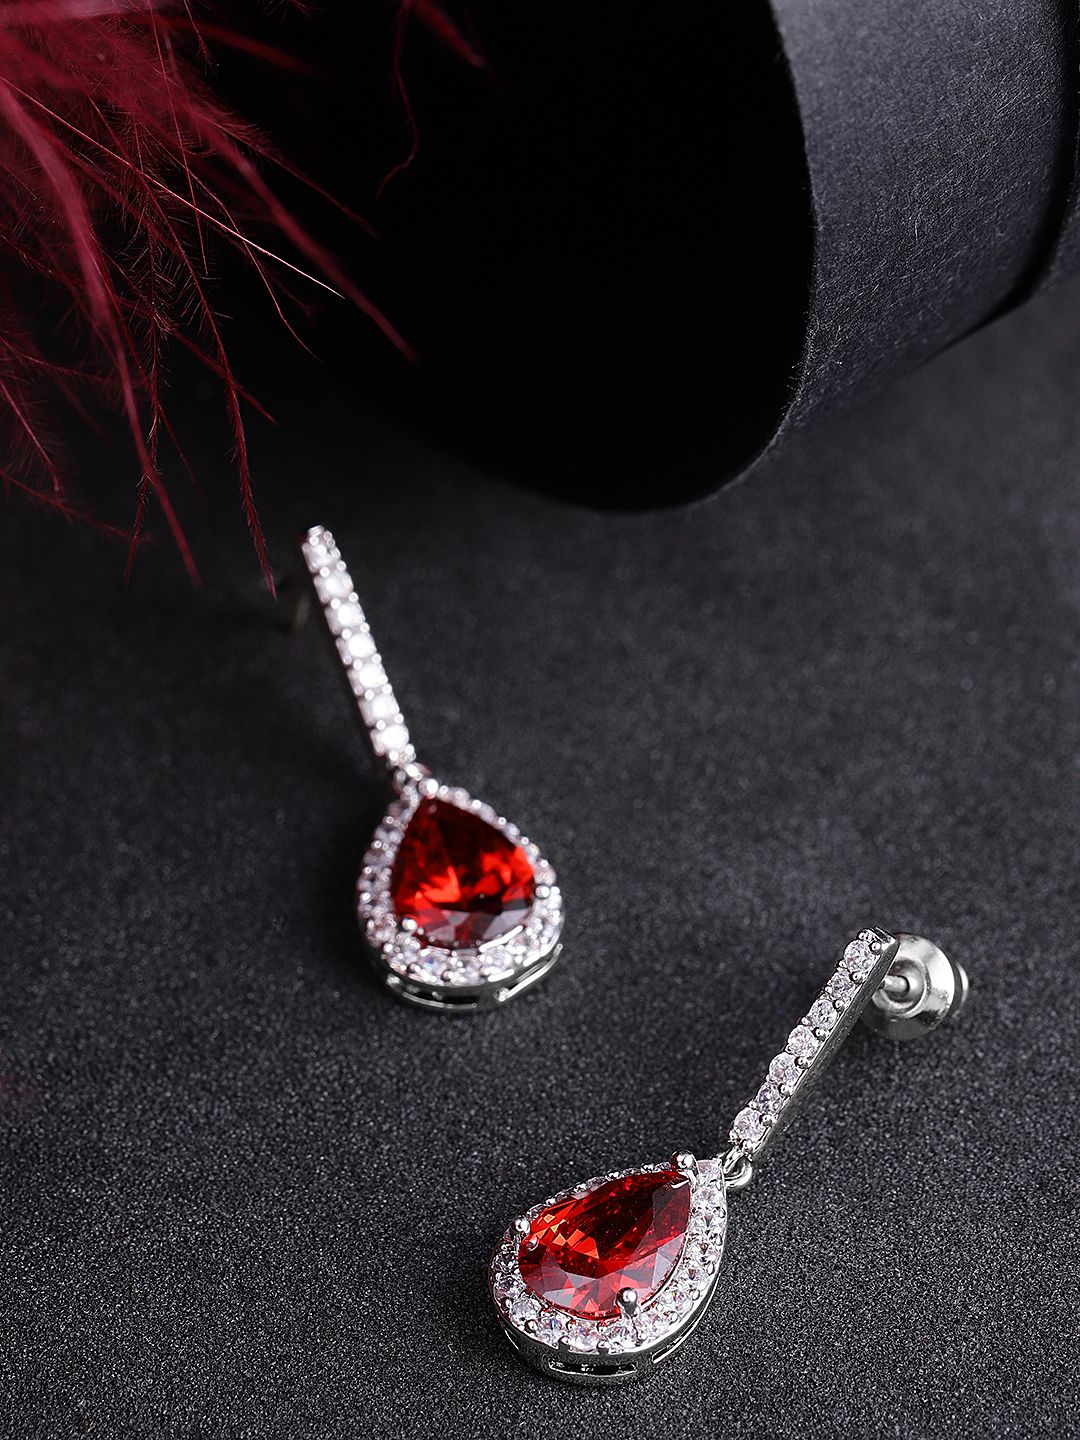 Carlton London Silver-Toned & Red Rhodium-Plated Teardrop Shaped CZ Studded Drop Earrings Price in India